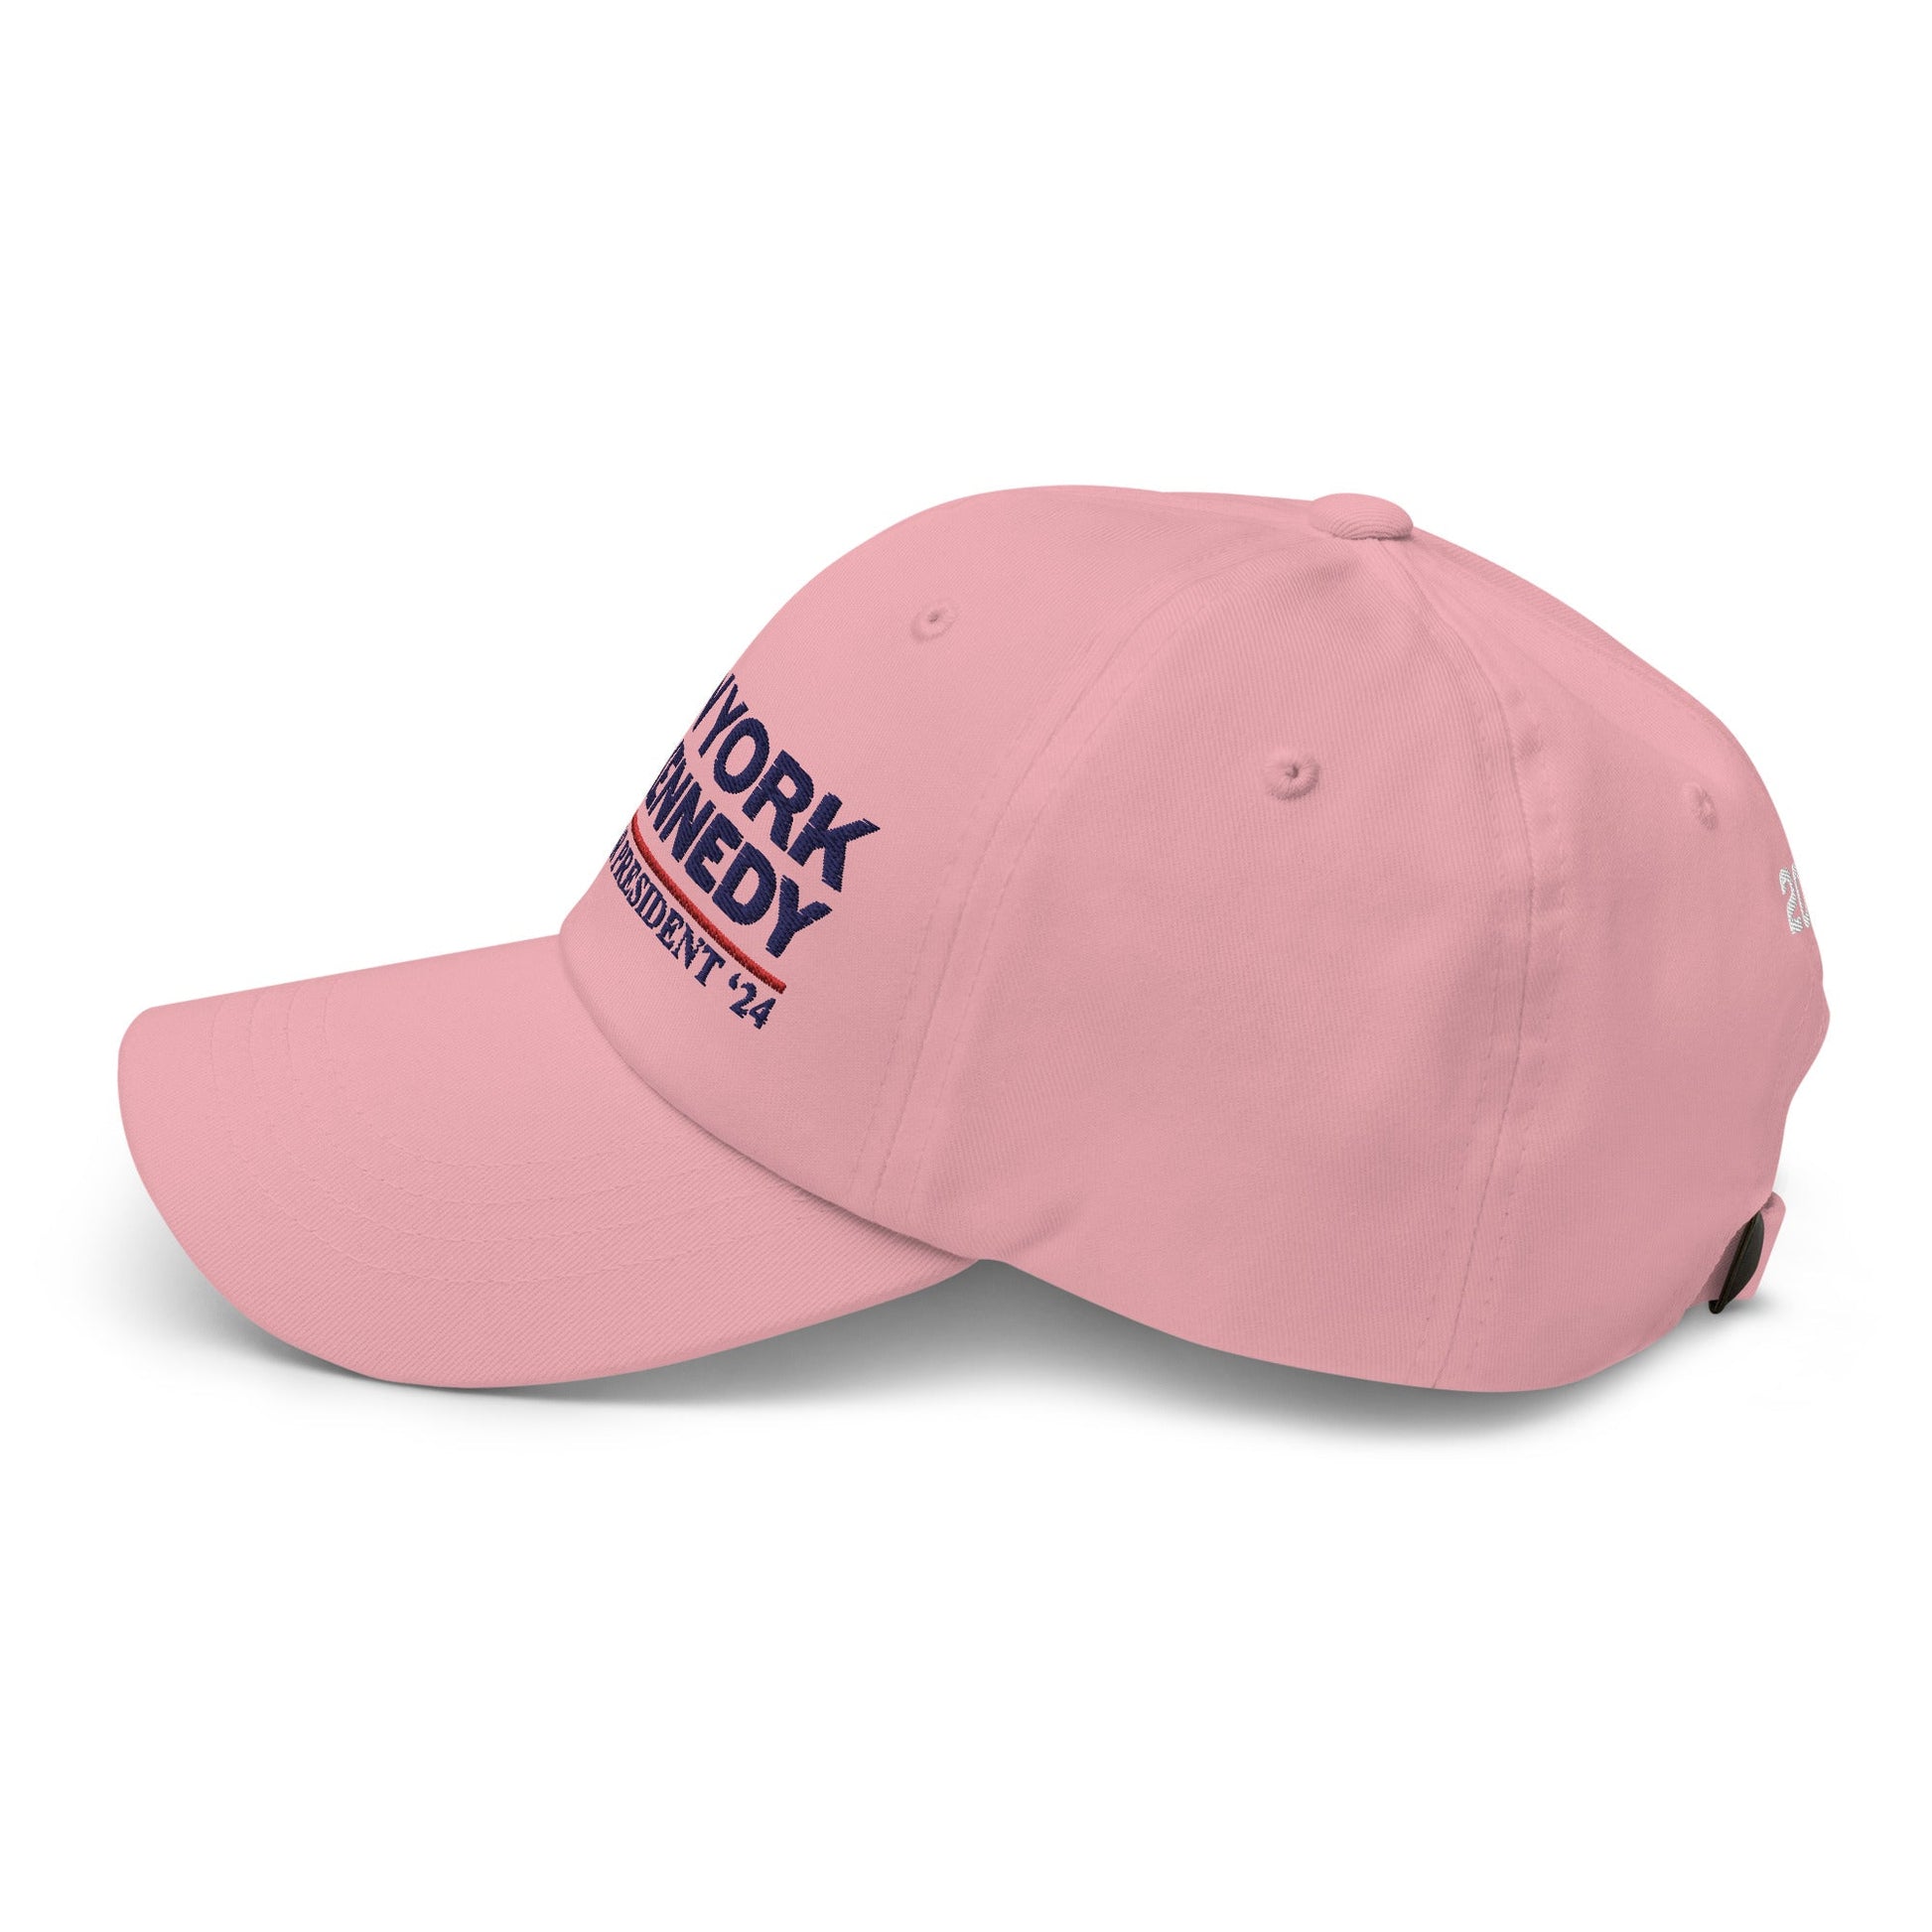 New York for Kennedy Dad hat - TEAM KENNEDY. All rights reserved